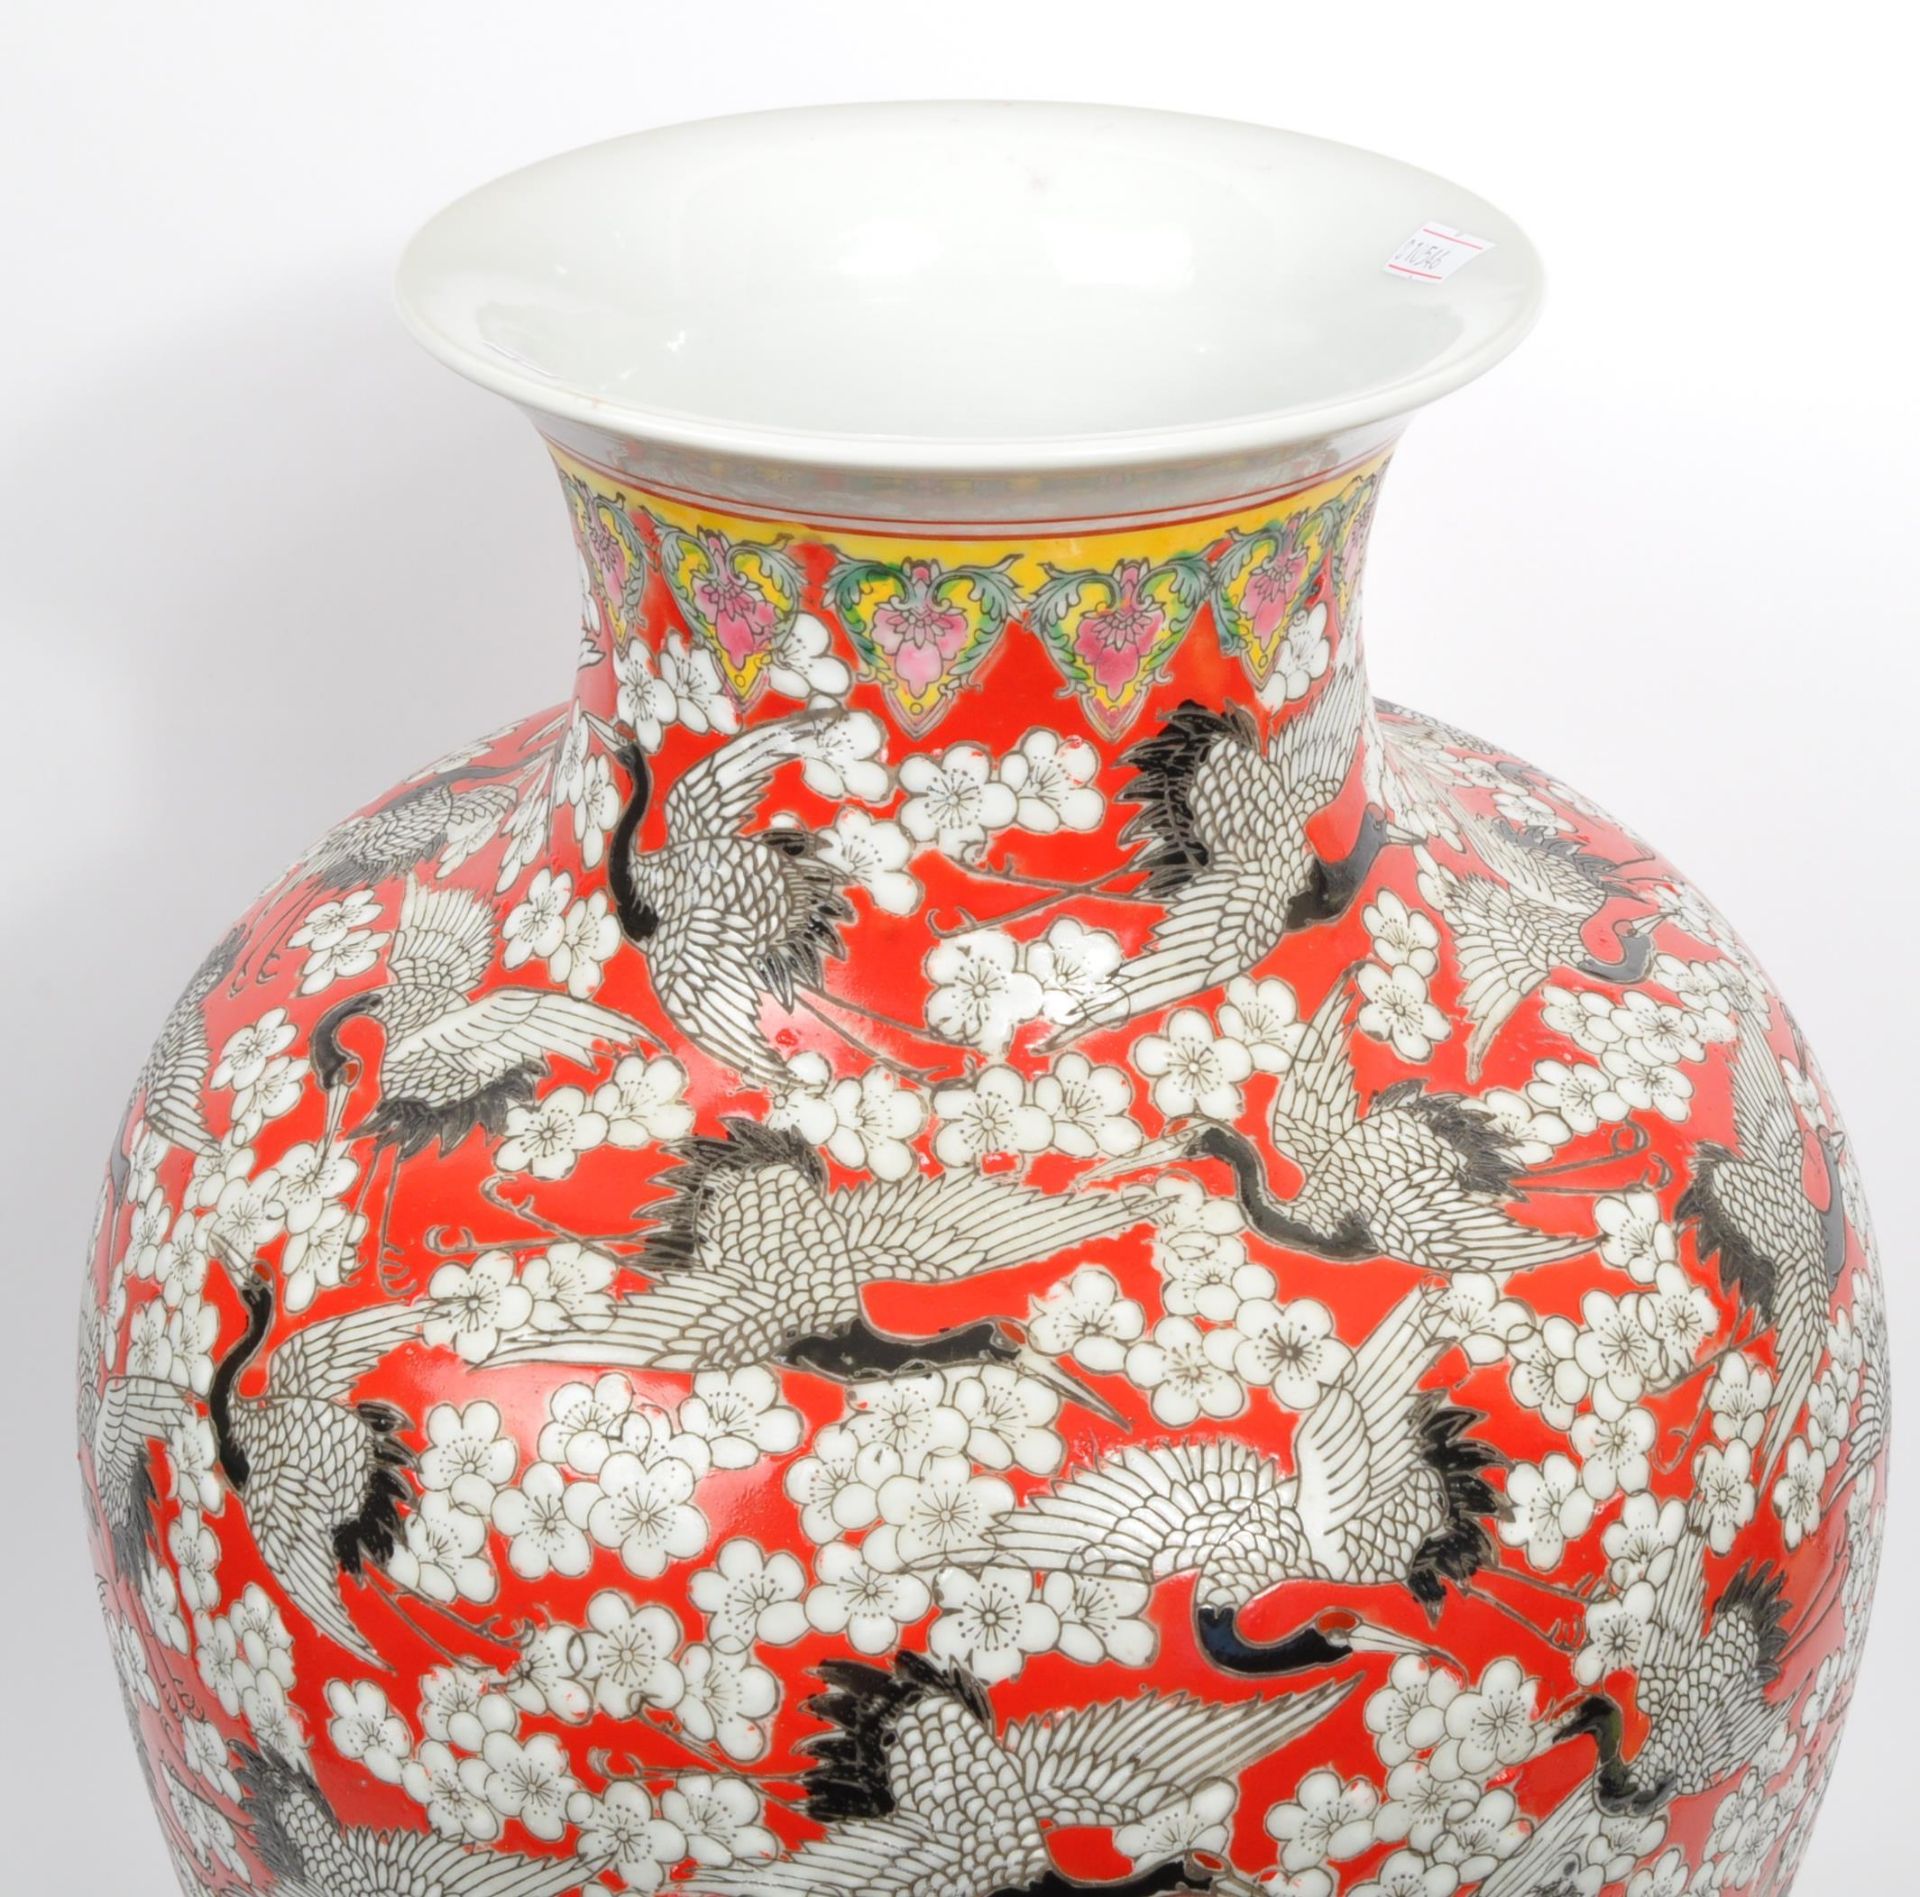 LARGE CHINESE VASE IN RED EMBELLISHED WITH CRANES & BLOSSOM - Image 3 of 6